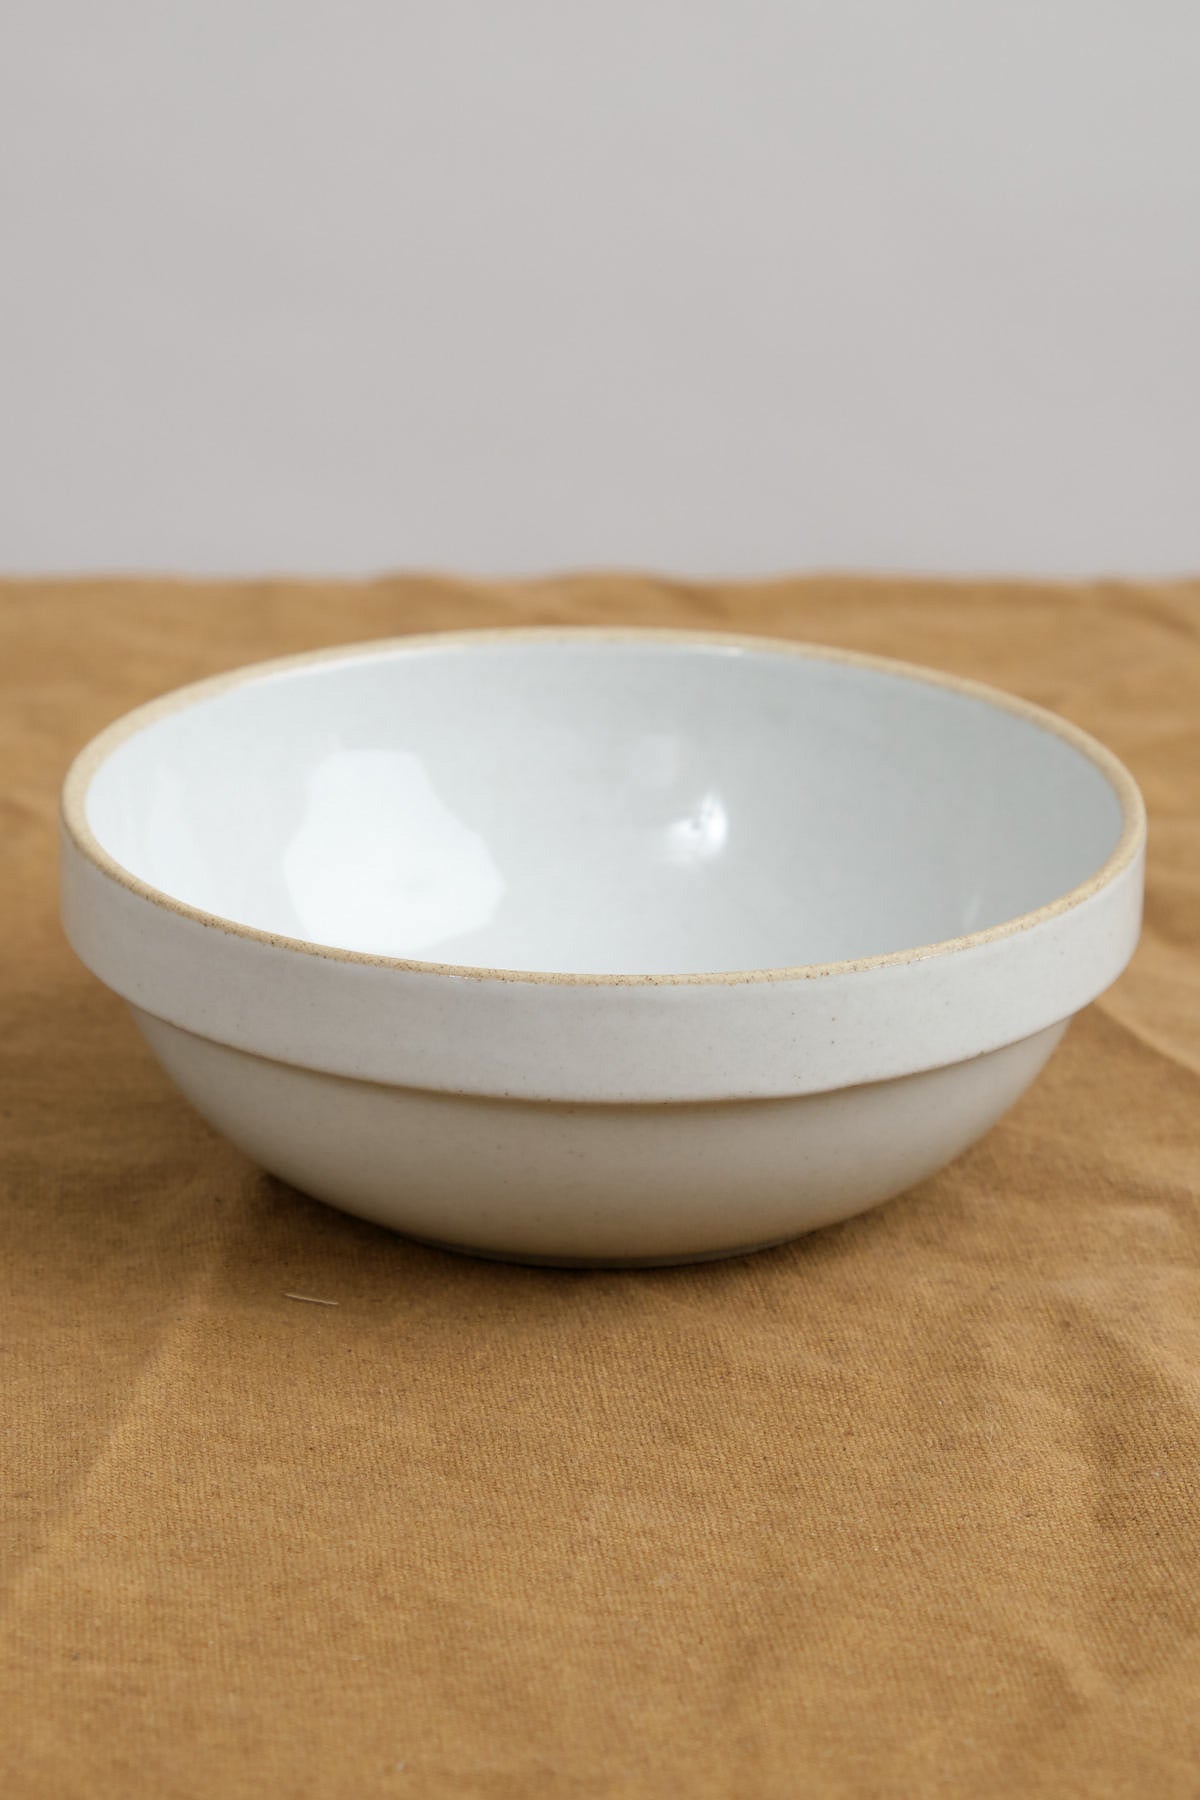 Hasami Porcelain Small Shallow Bowl in Gloss Gray 